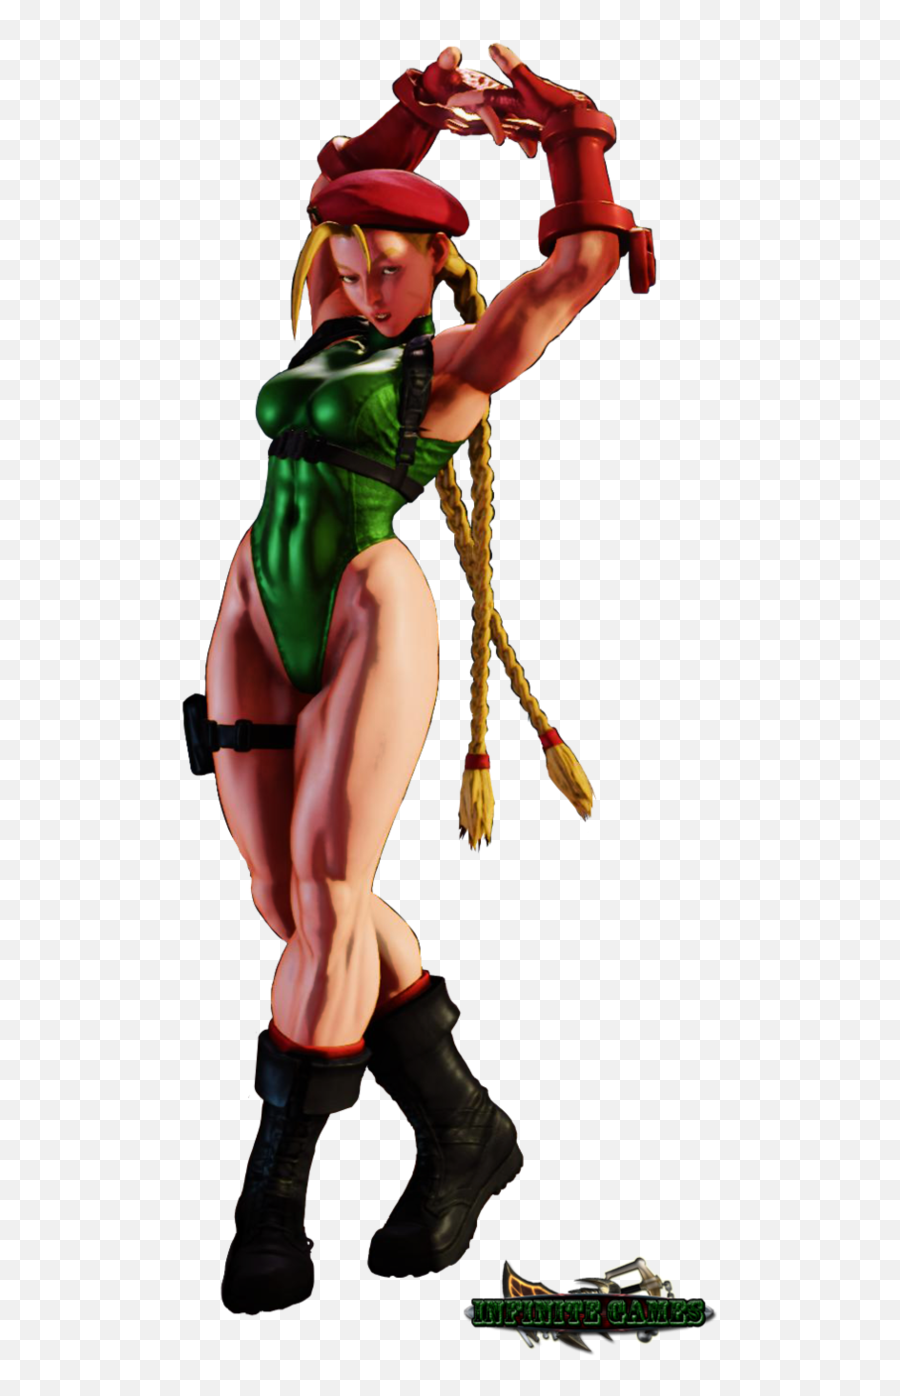 Cammy Street Fighter png download - 680*1173 - Free Transparent